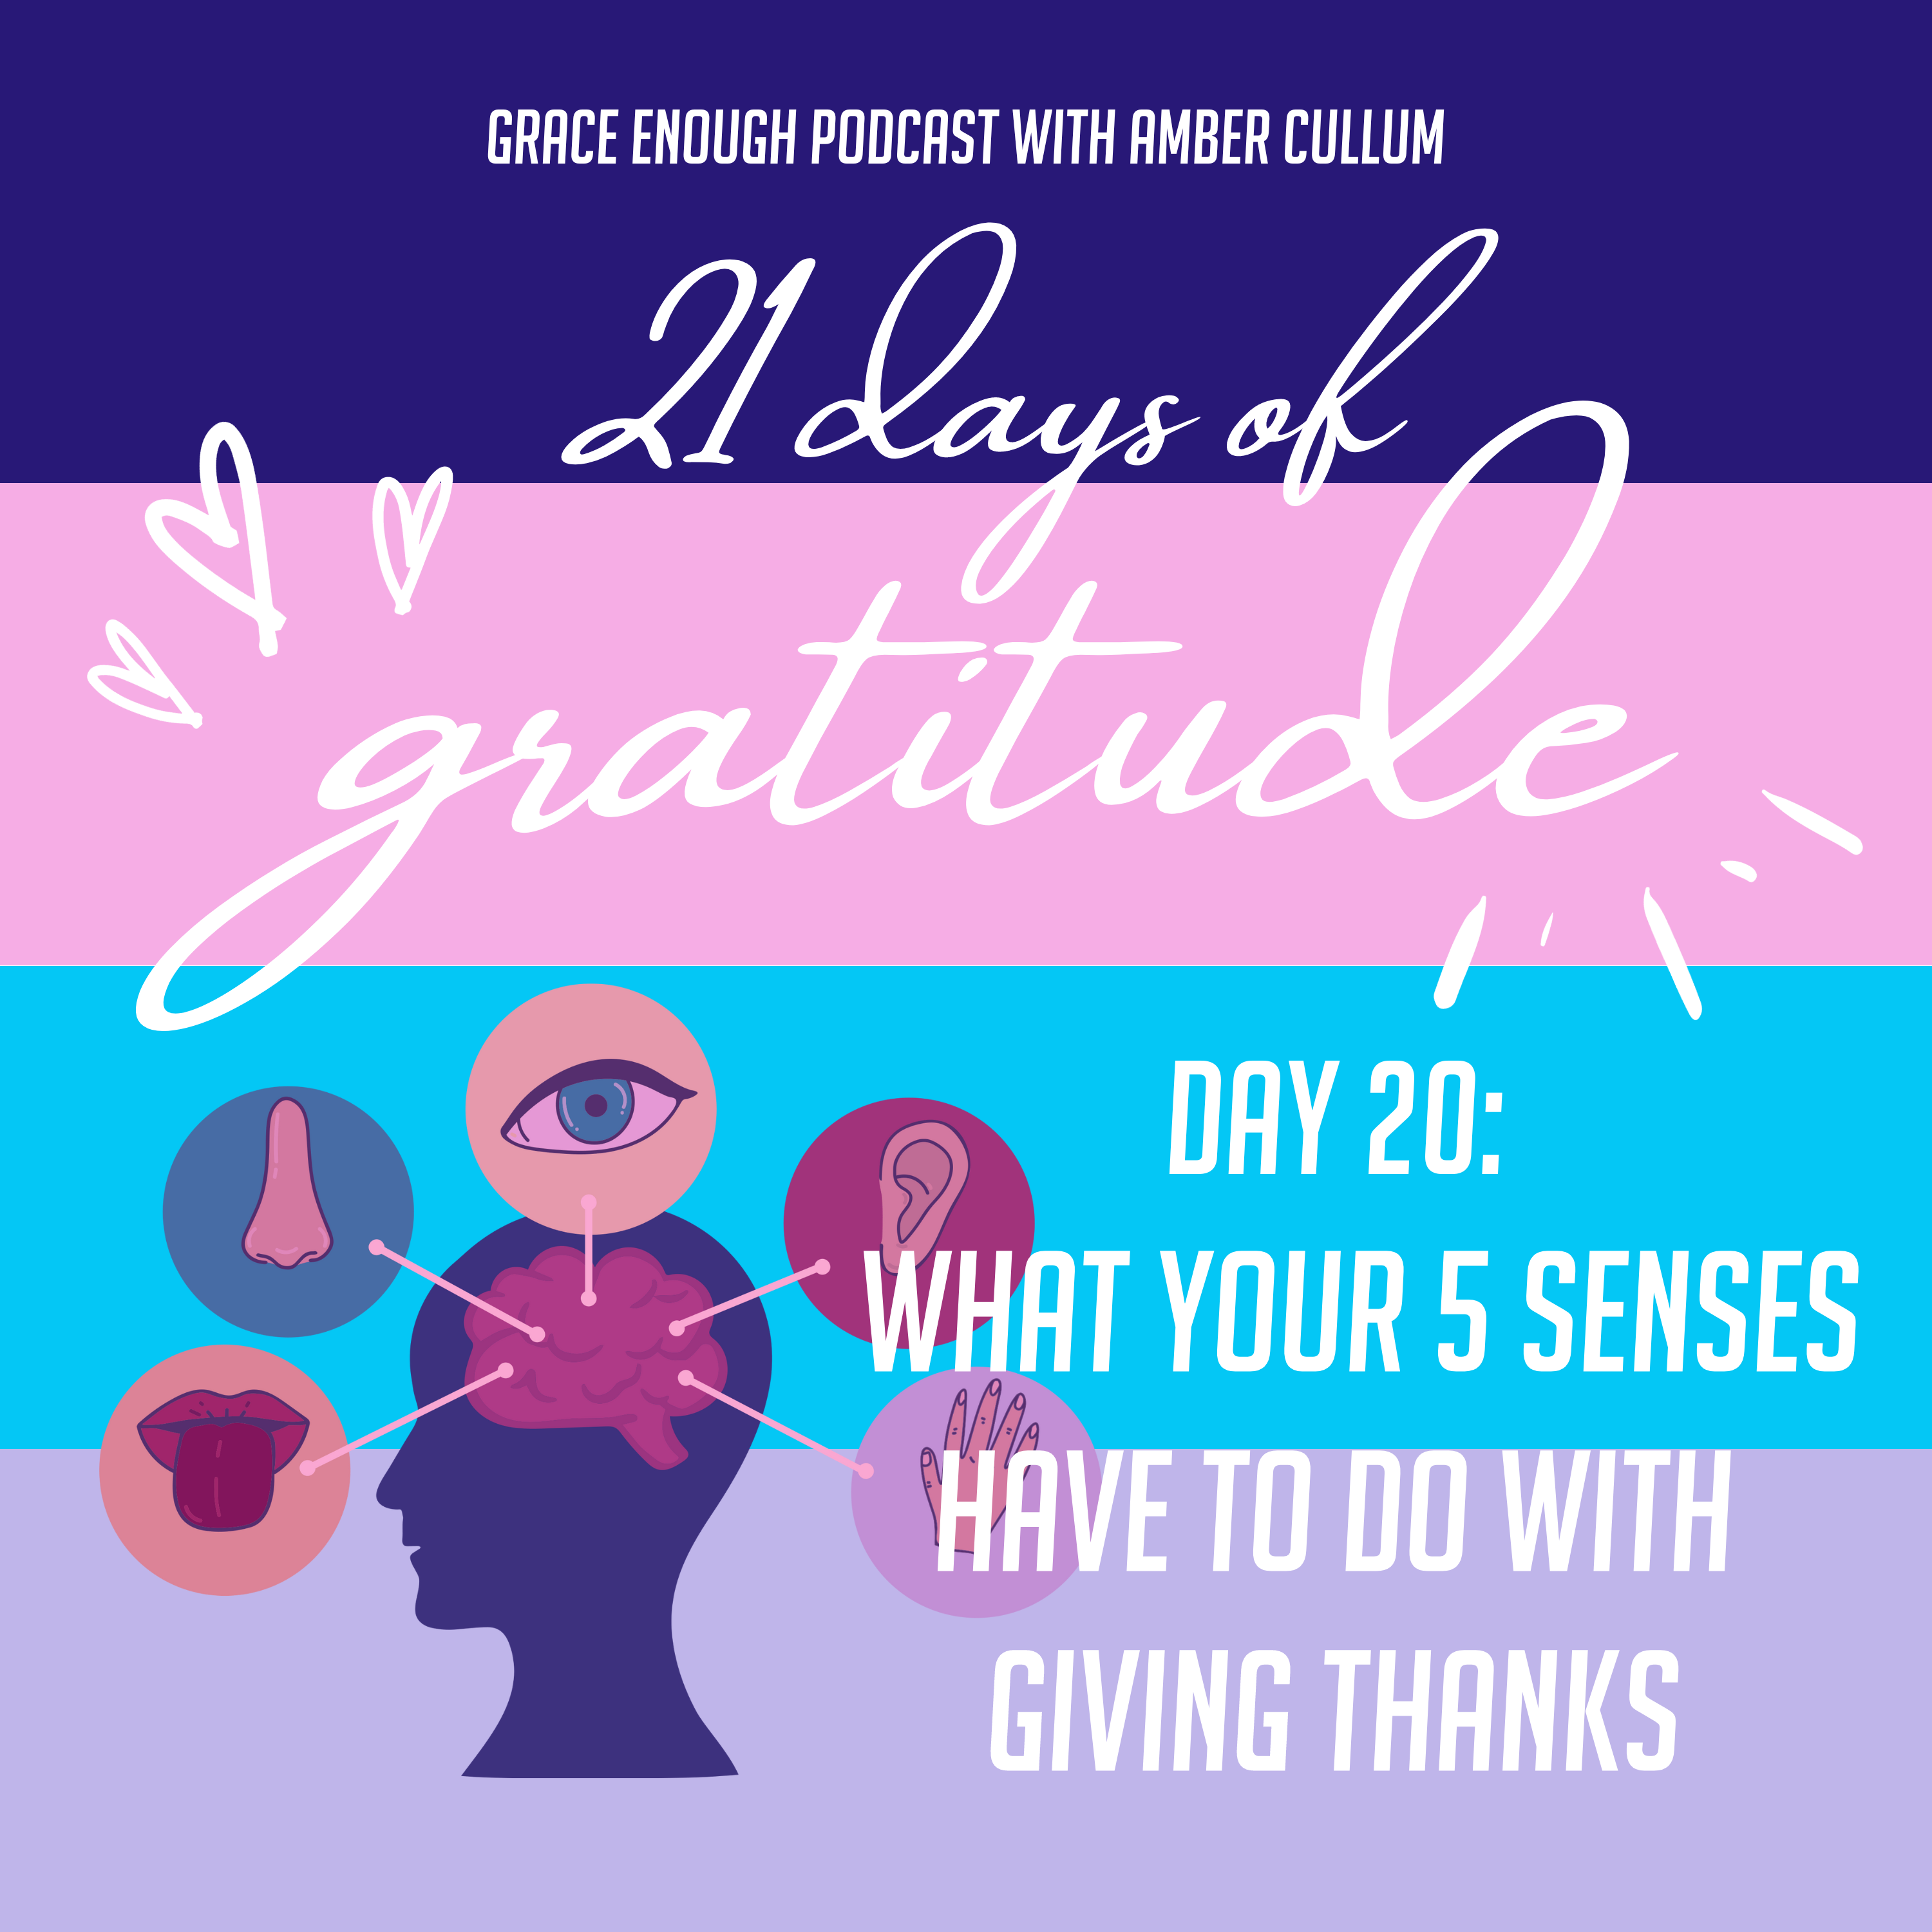 21 Days of Gratitude: Day 20, What Your 5 Senses HAve to do with Giving Thanks